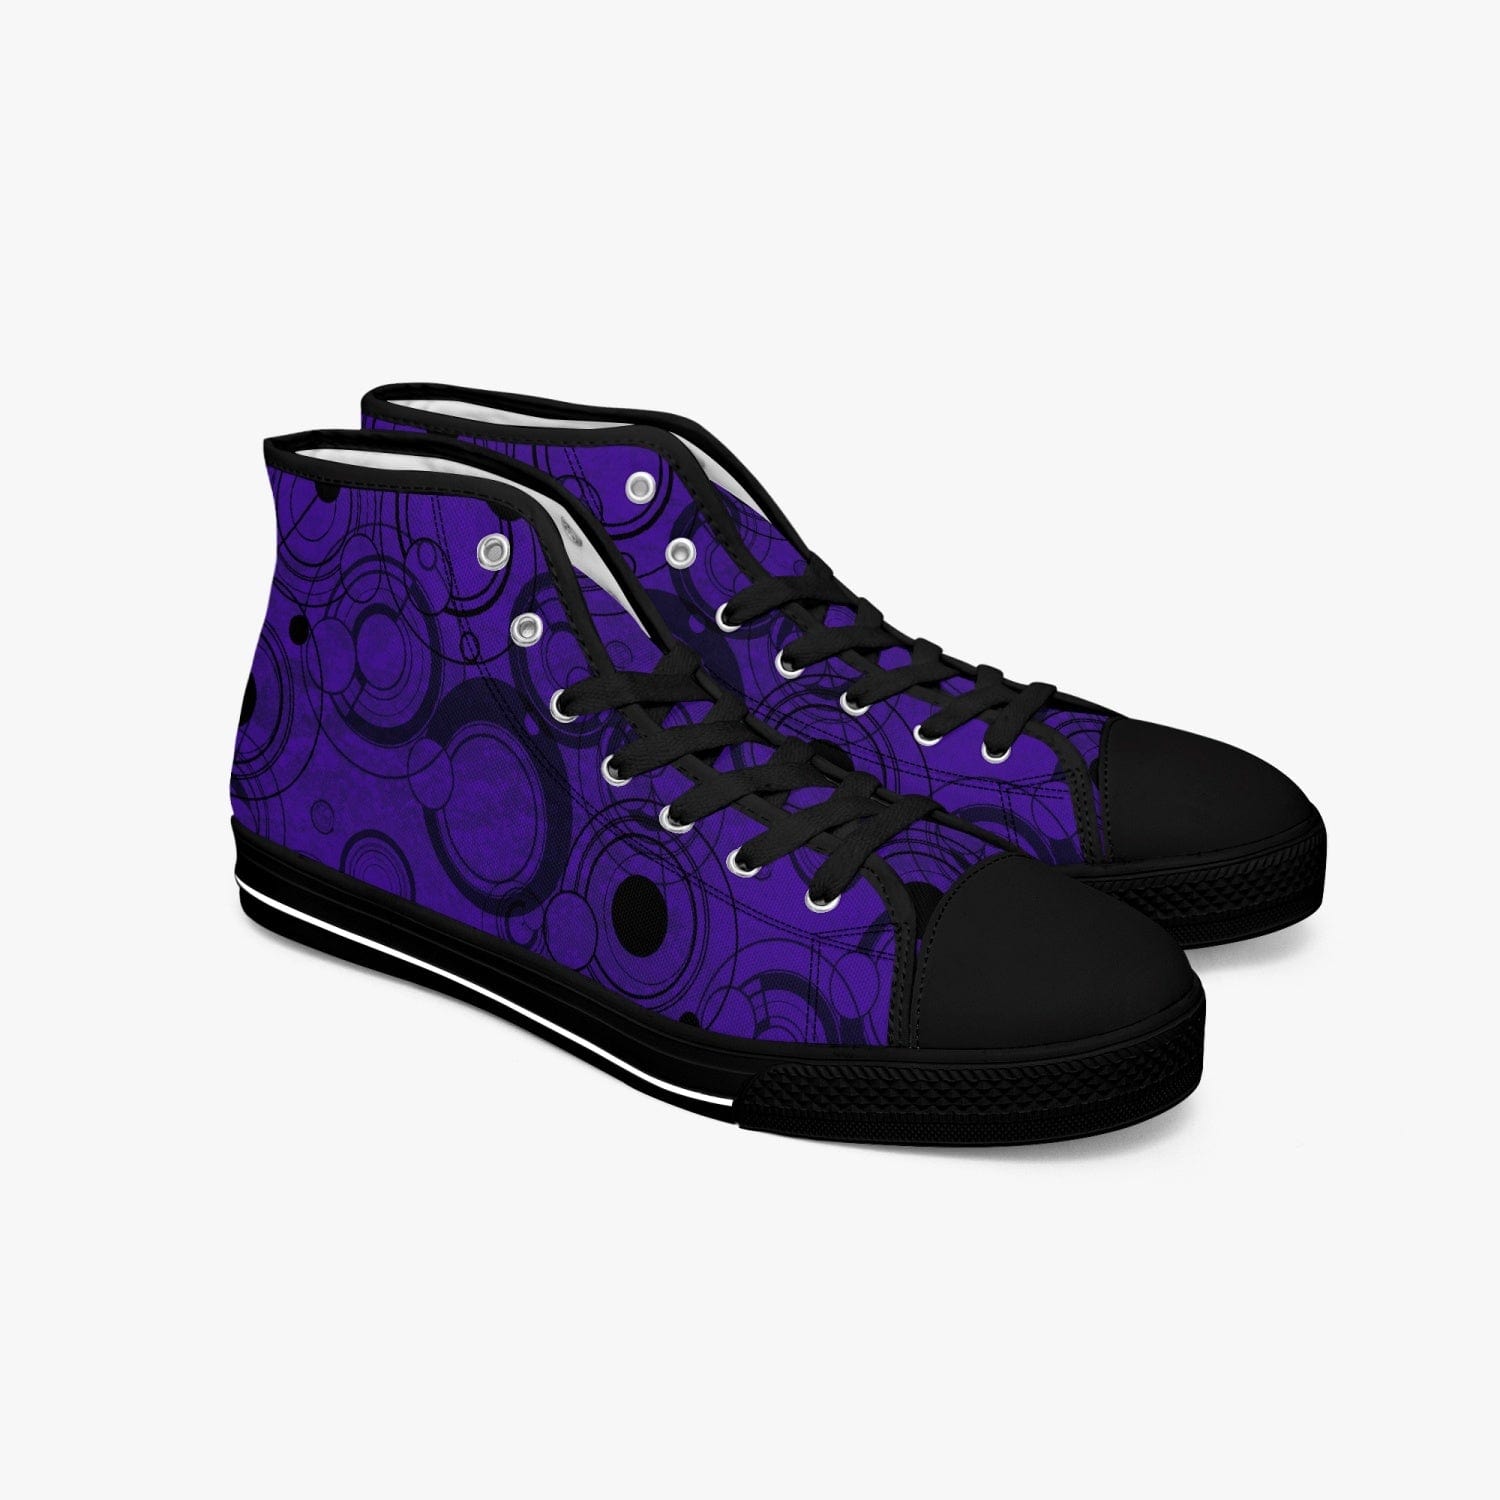 Women's Time Lord Gallifreyan Gallifrey language retro sneakers in a vivid gothic purple at Gallery Serpentine 2